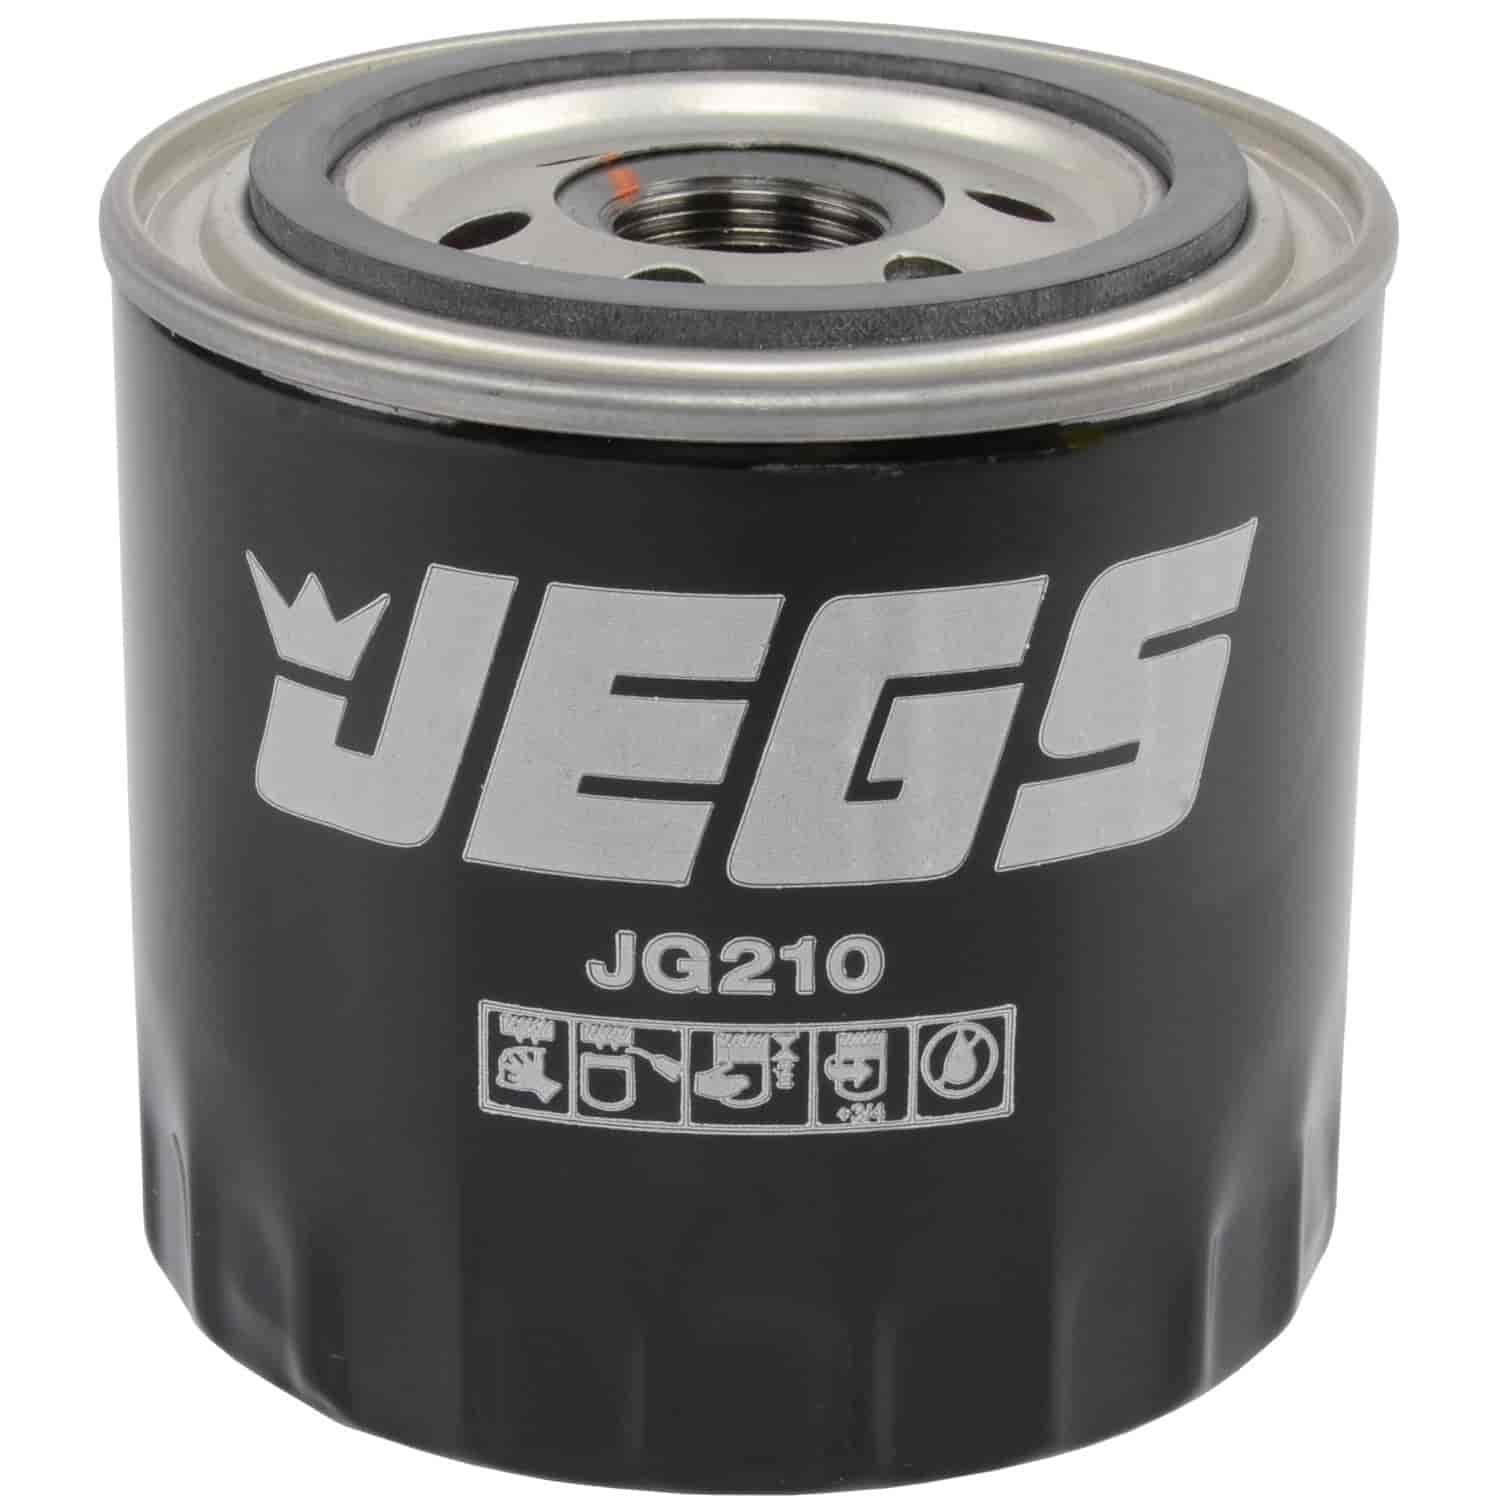 Performance Ford, Dodge Oil Filter 3.75 in. High, 22mm x 1.5 Thread